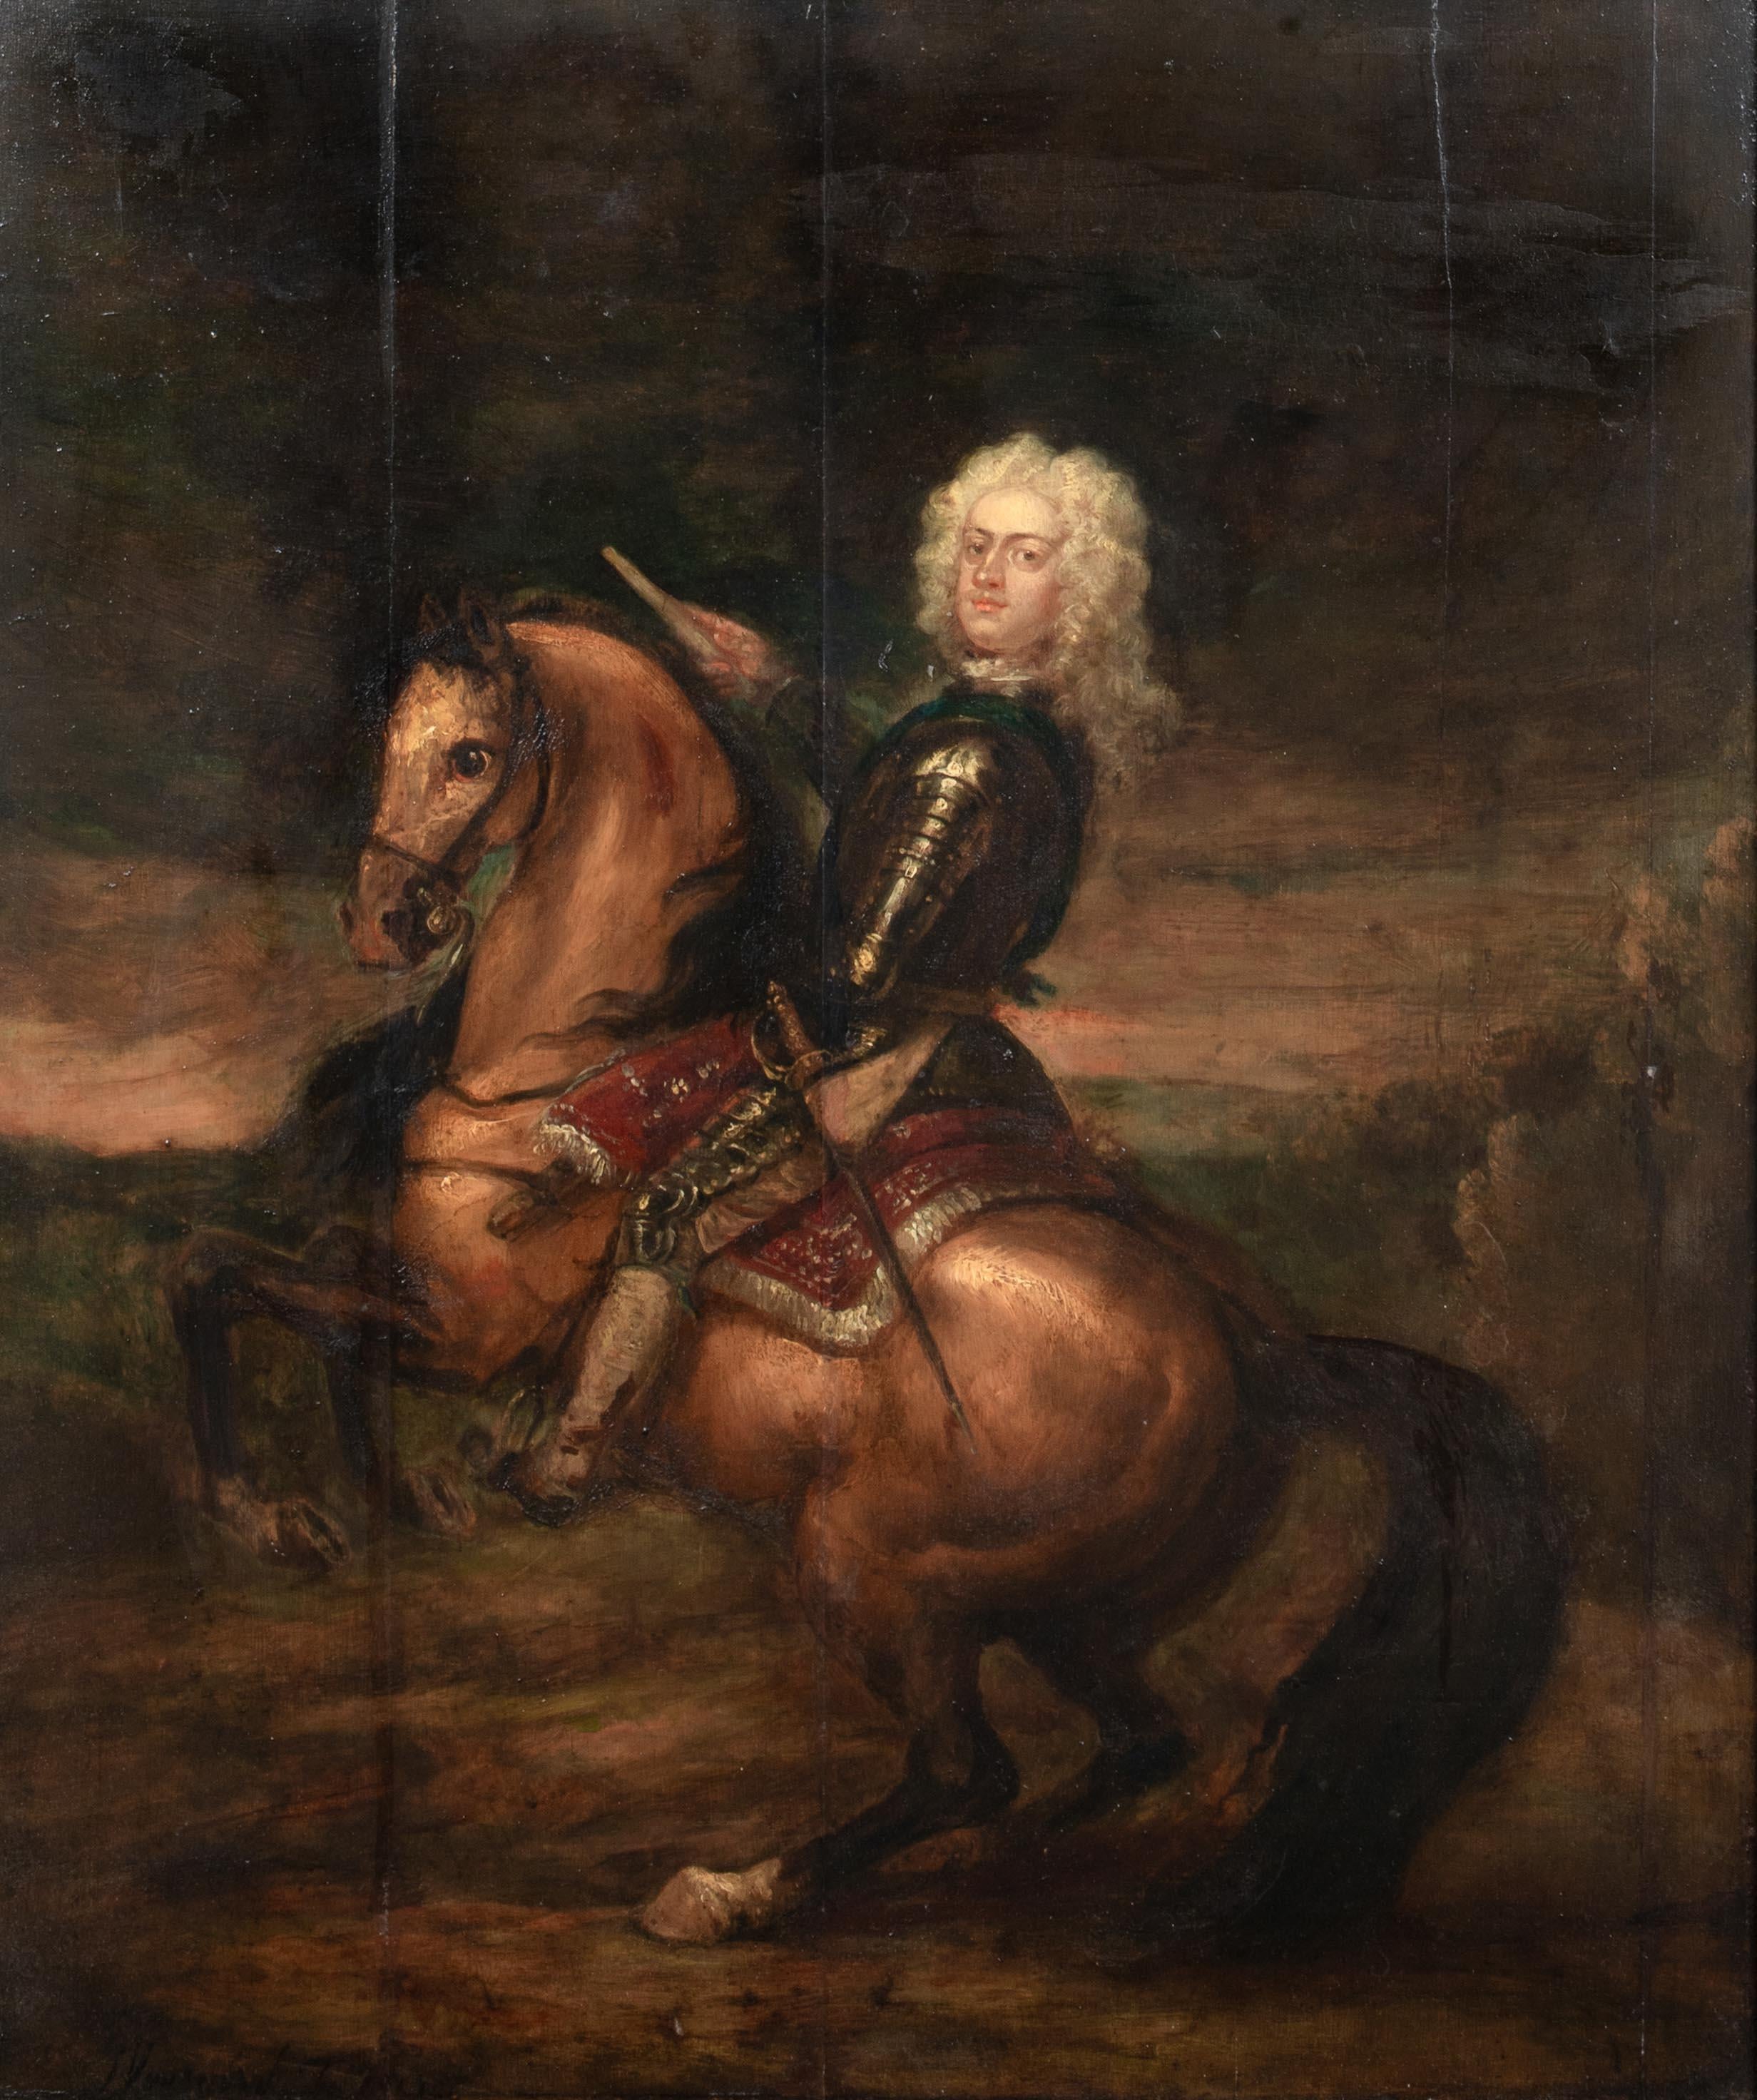 Portrait Of General John Churchill, The Duke Of Marlborough At The Battle Of Ramillies, 1706

by JOHN VANDERBANK THE YOUNGER (1694-1739)

Large early 18th Century portrait of The Duke Of Marlborough at the Battle Of Ramillies, oil on panel by John